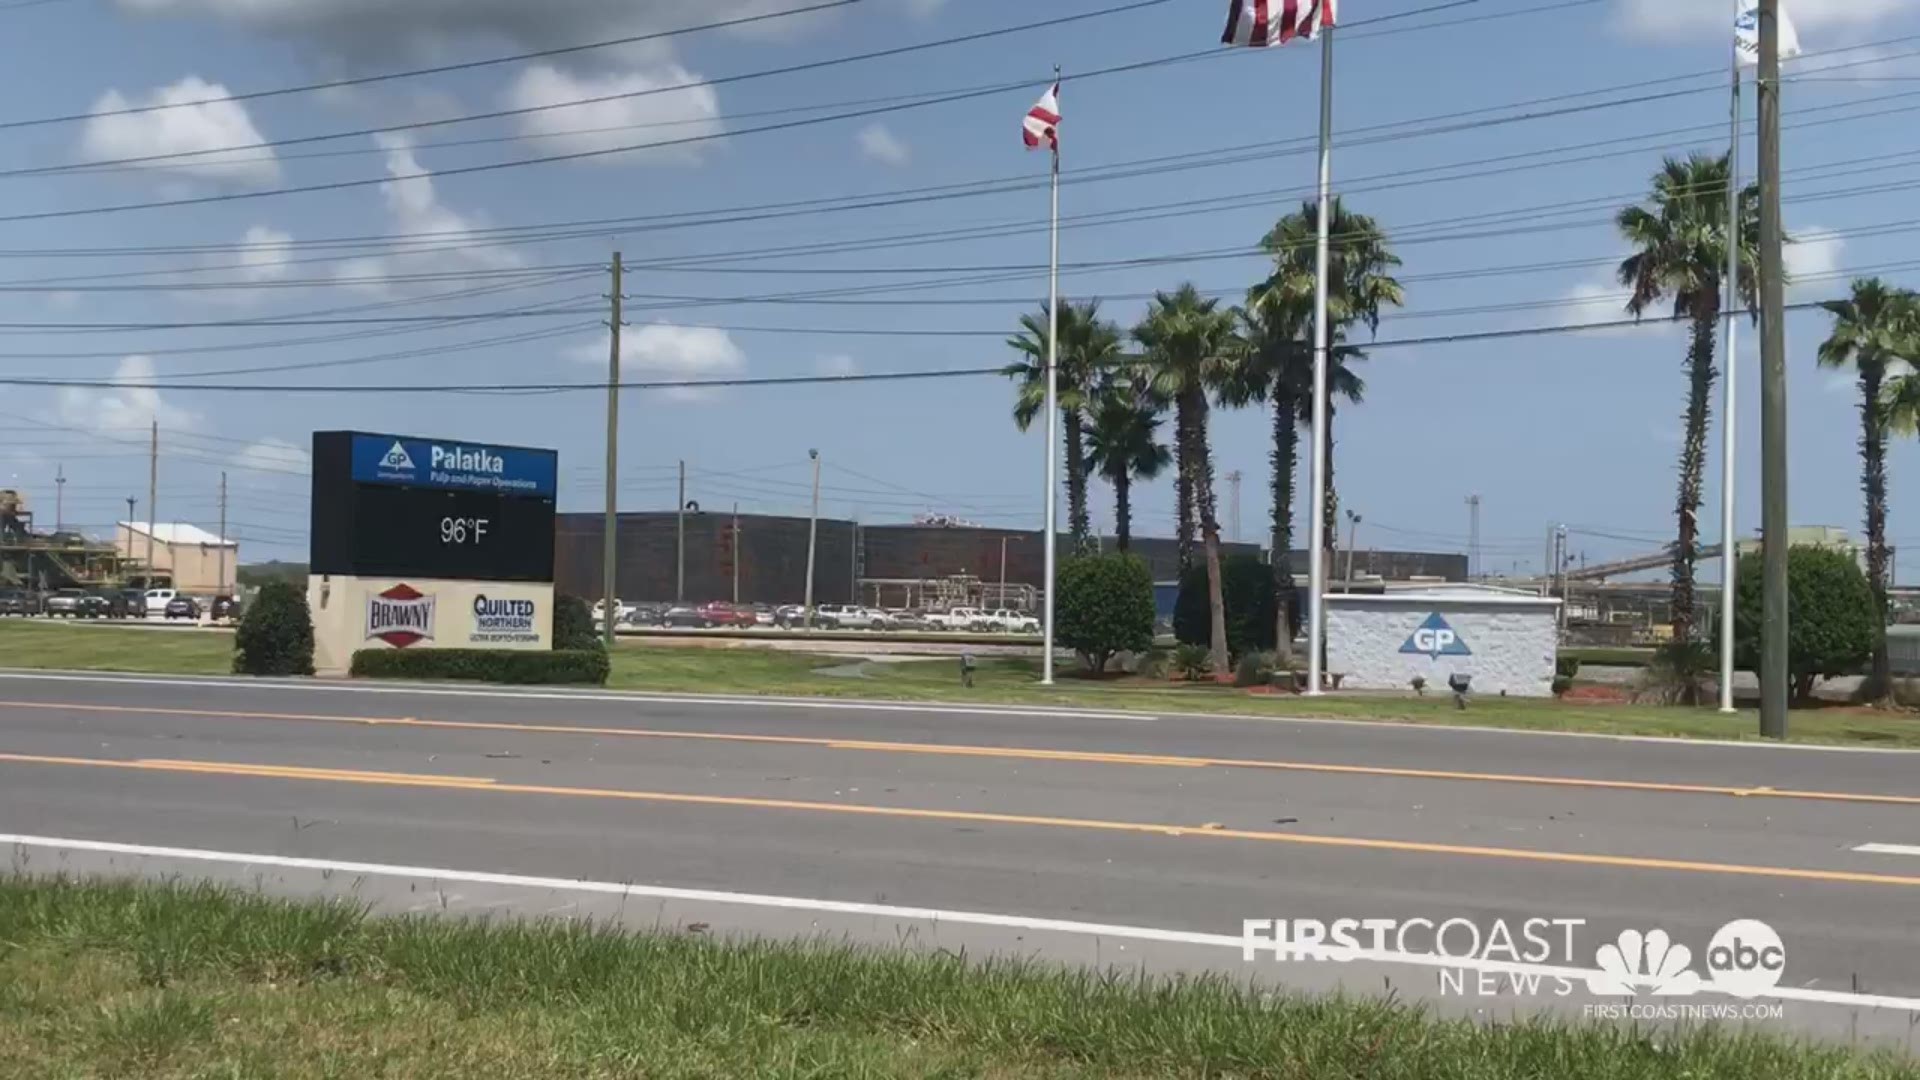 No injuries have been reported and operations are ongoing after a fire breaks out at Palatka paper plant. Fire rescue is working to get the fire under control.